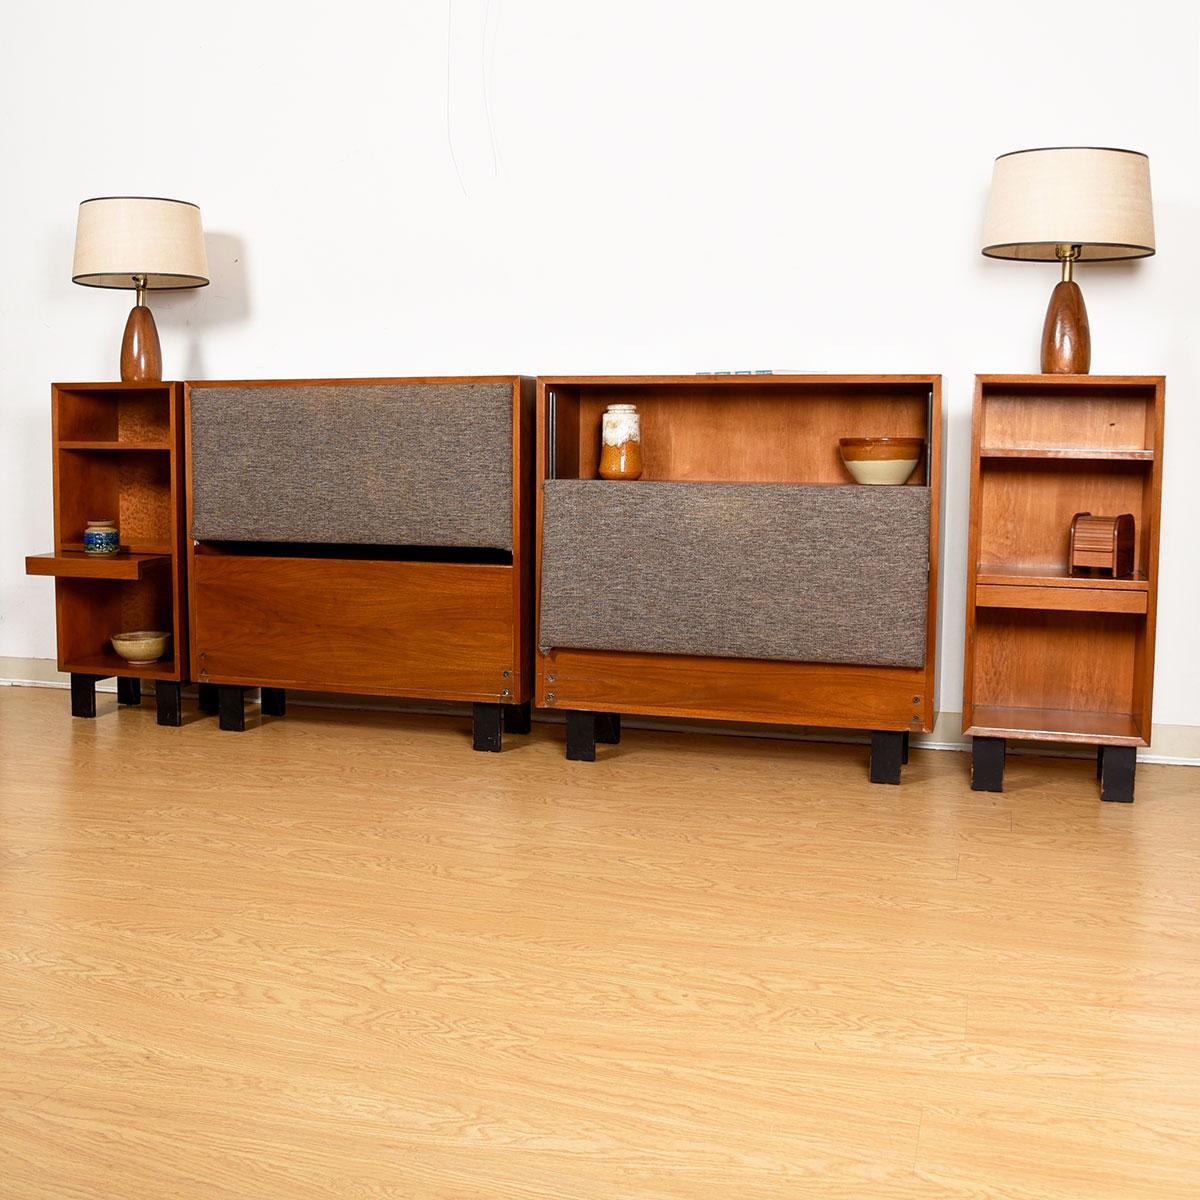 Pair of Mid-Century Modern Headboards & Nightstands by George Nelson For Sale 5